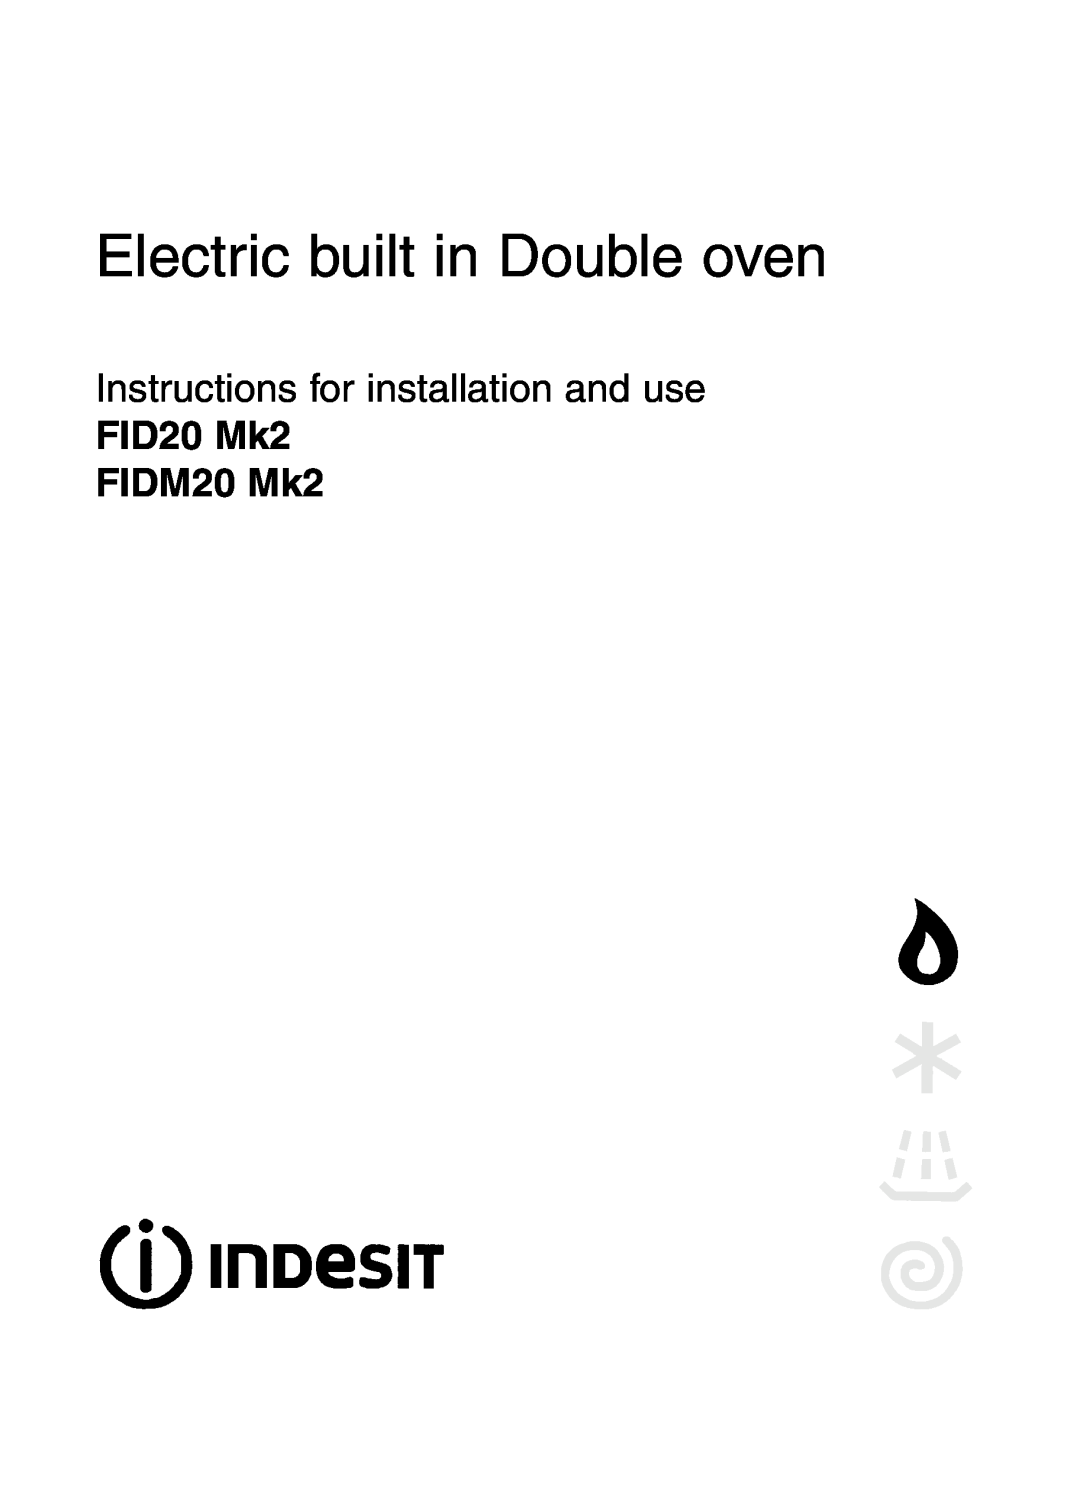 Indesit manual Electric built in Double oven, Instructions for installation and use, FID20 Mk2 FIDM20 Mk2 